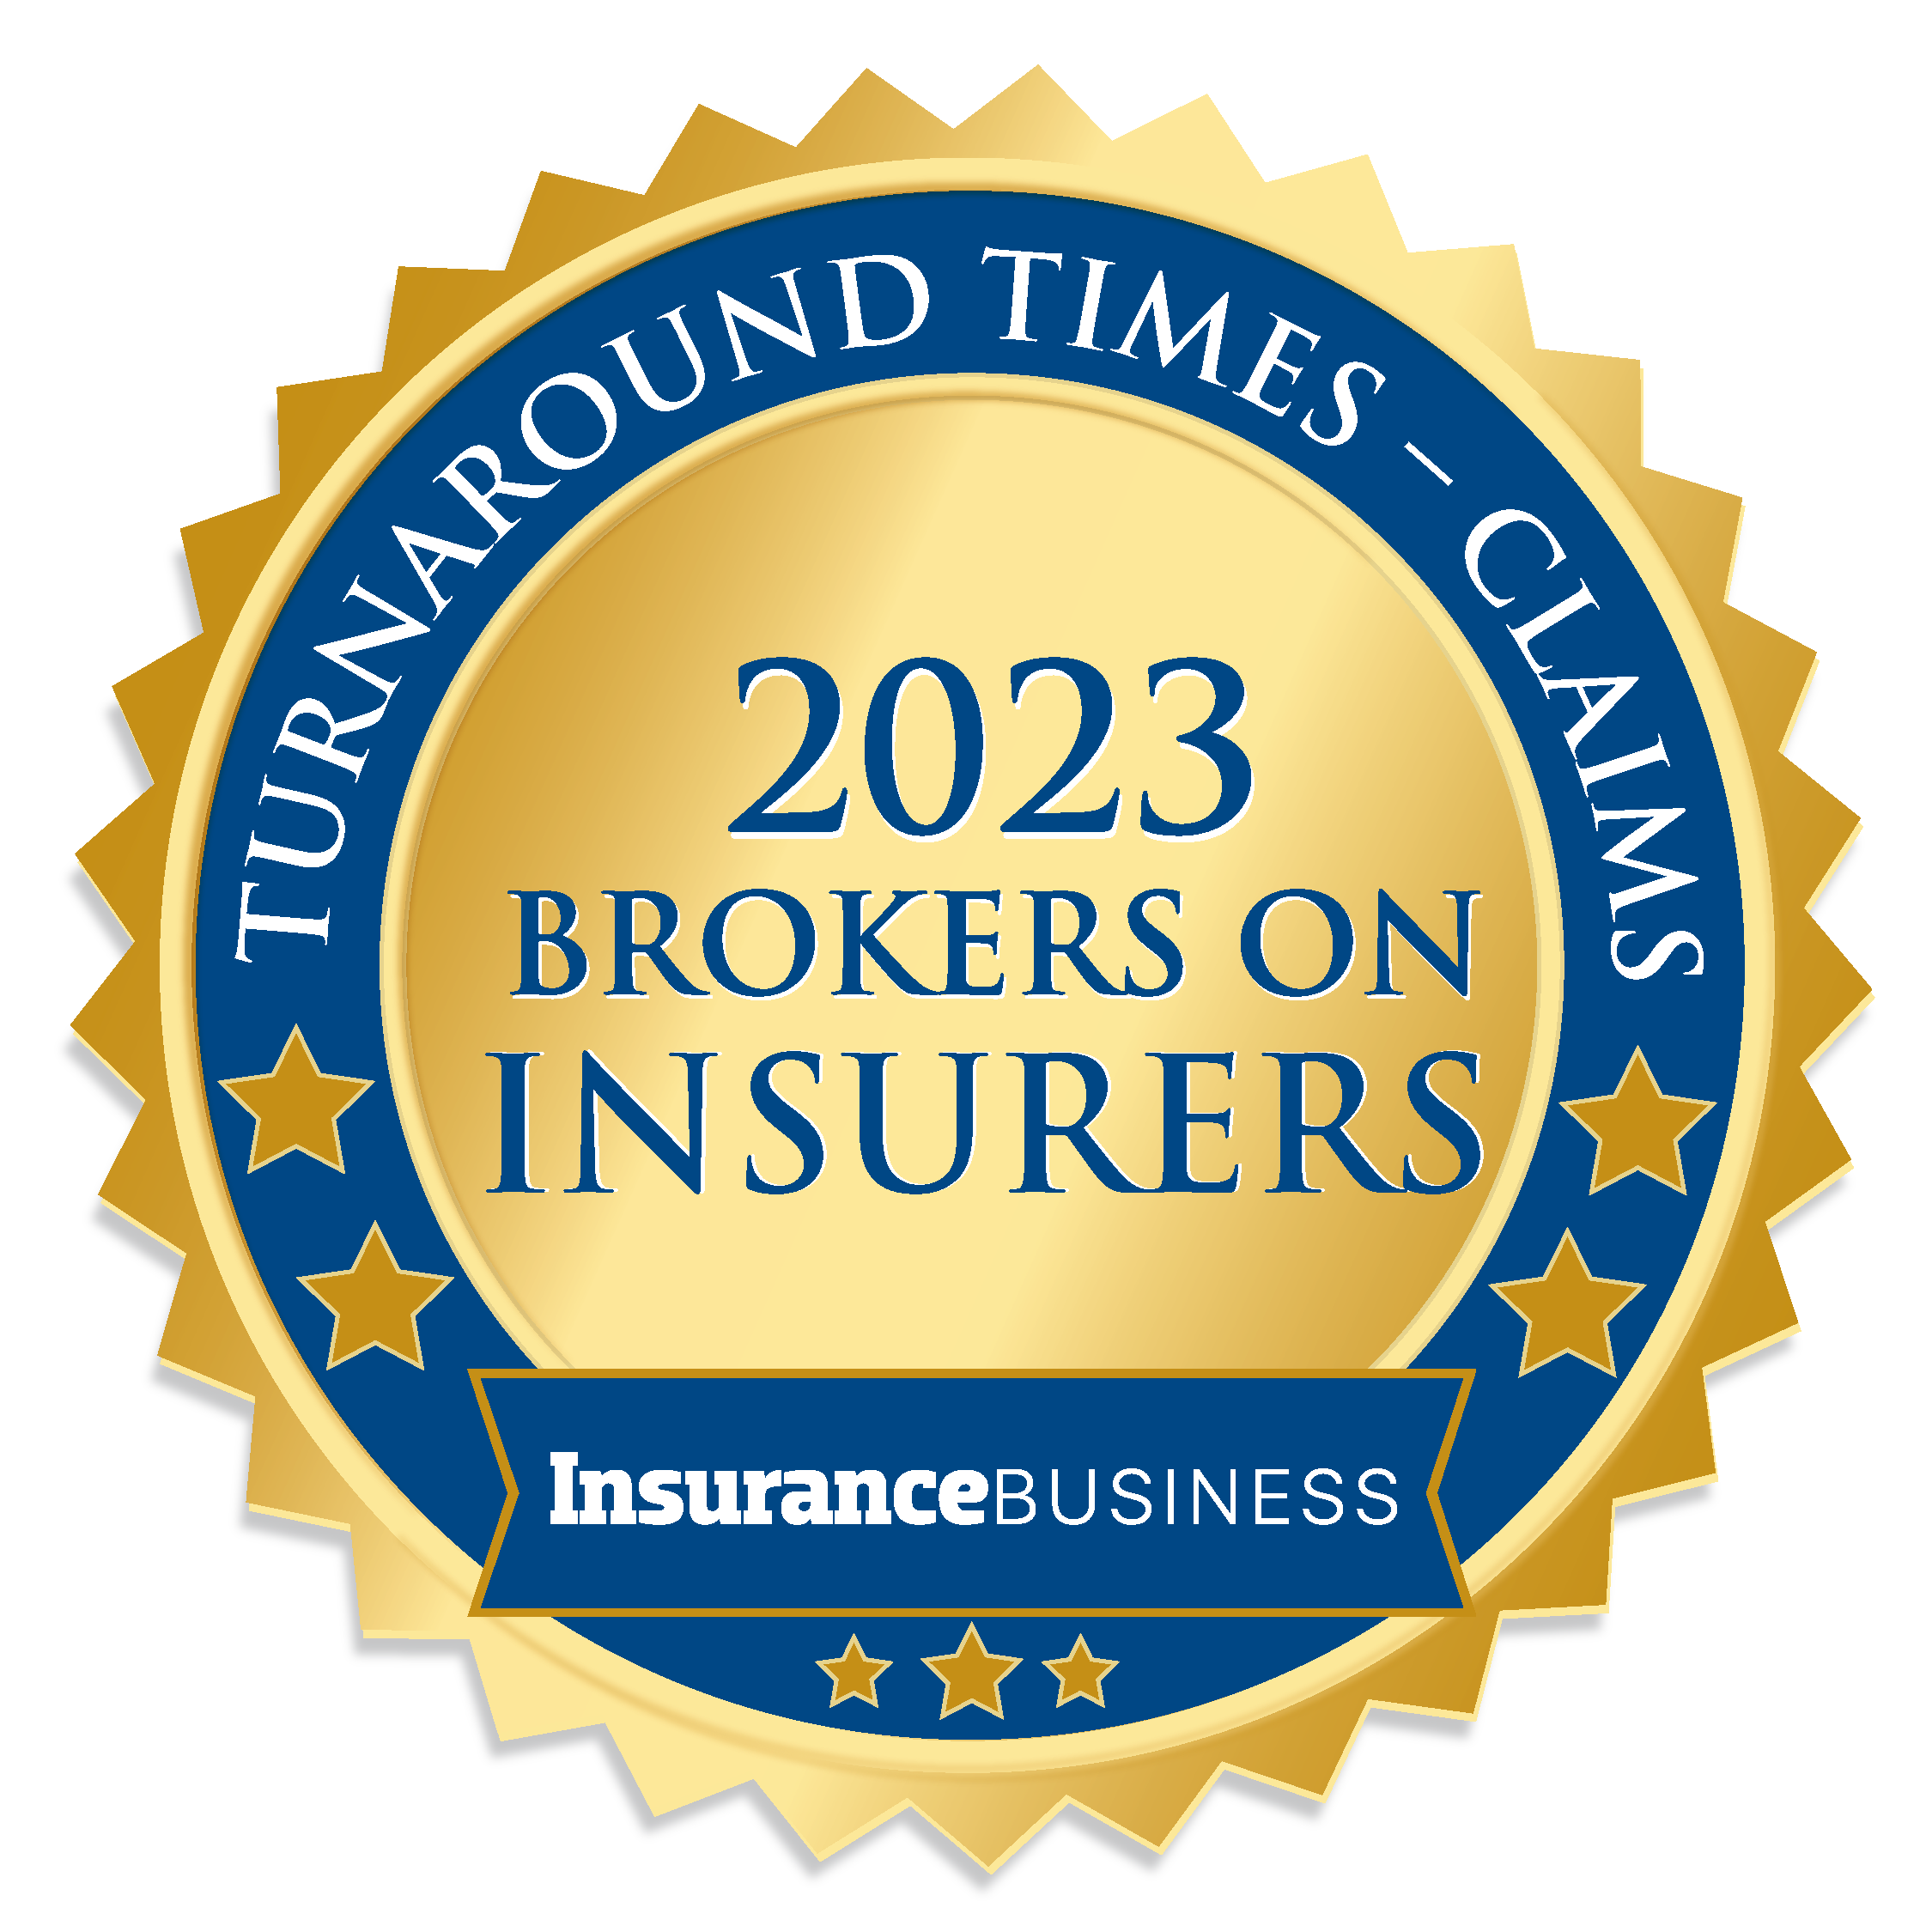 IB Brokers on Insurers 2023 - Turnaround times - Claims Medal